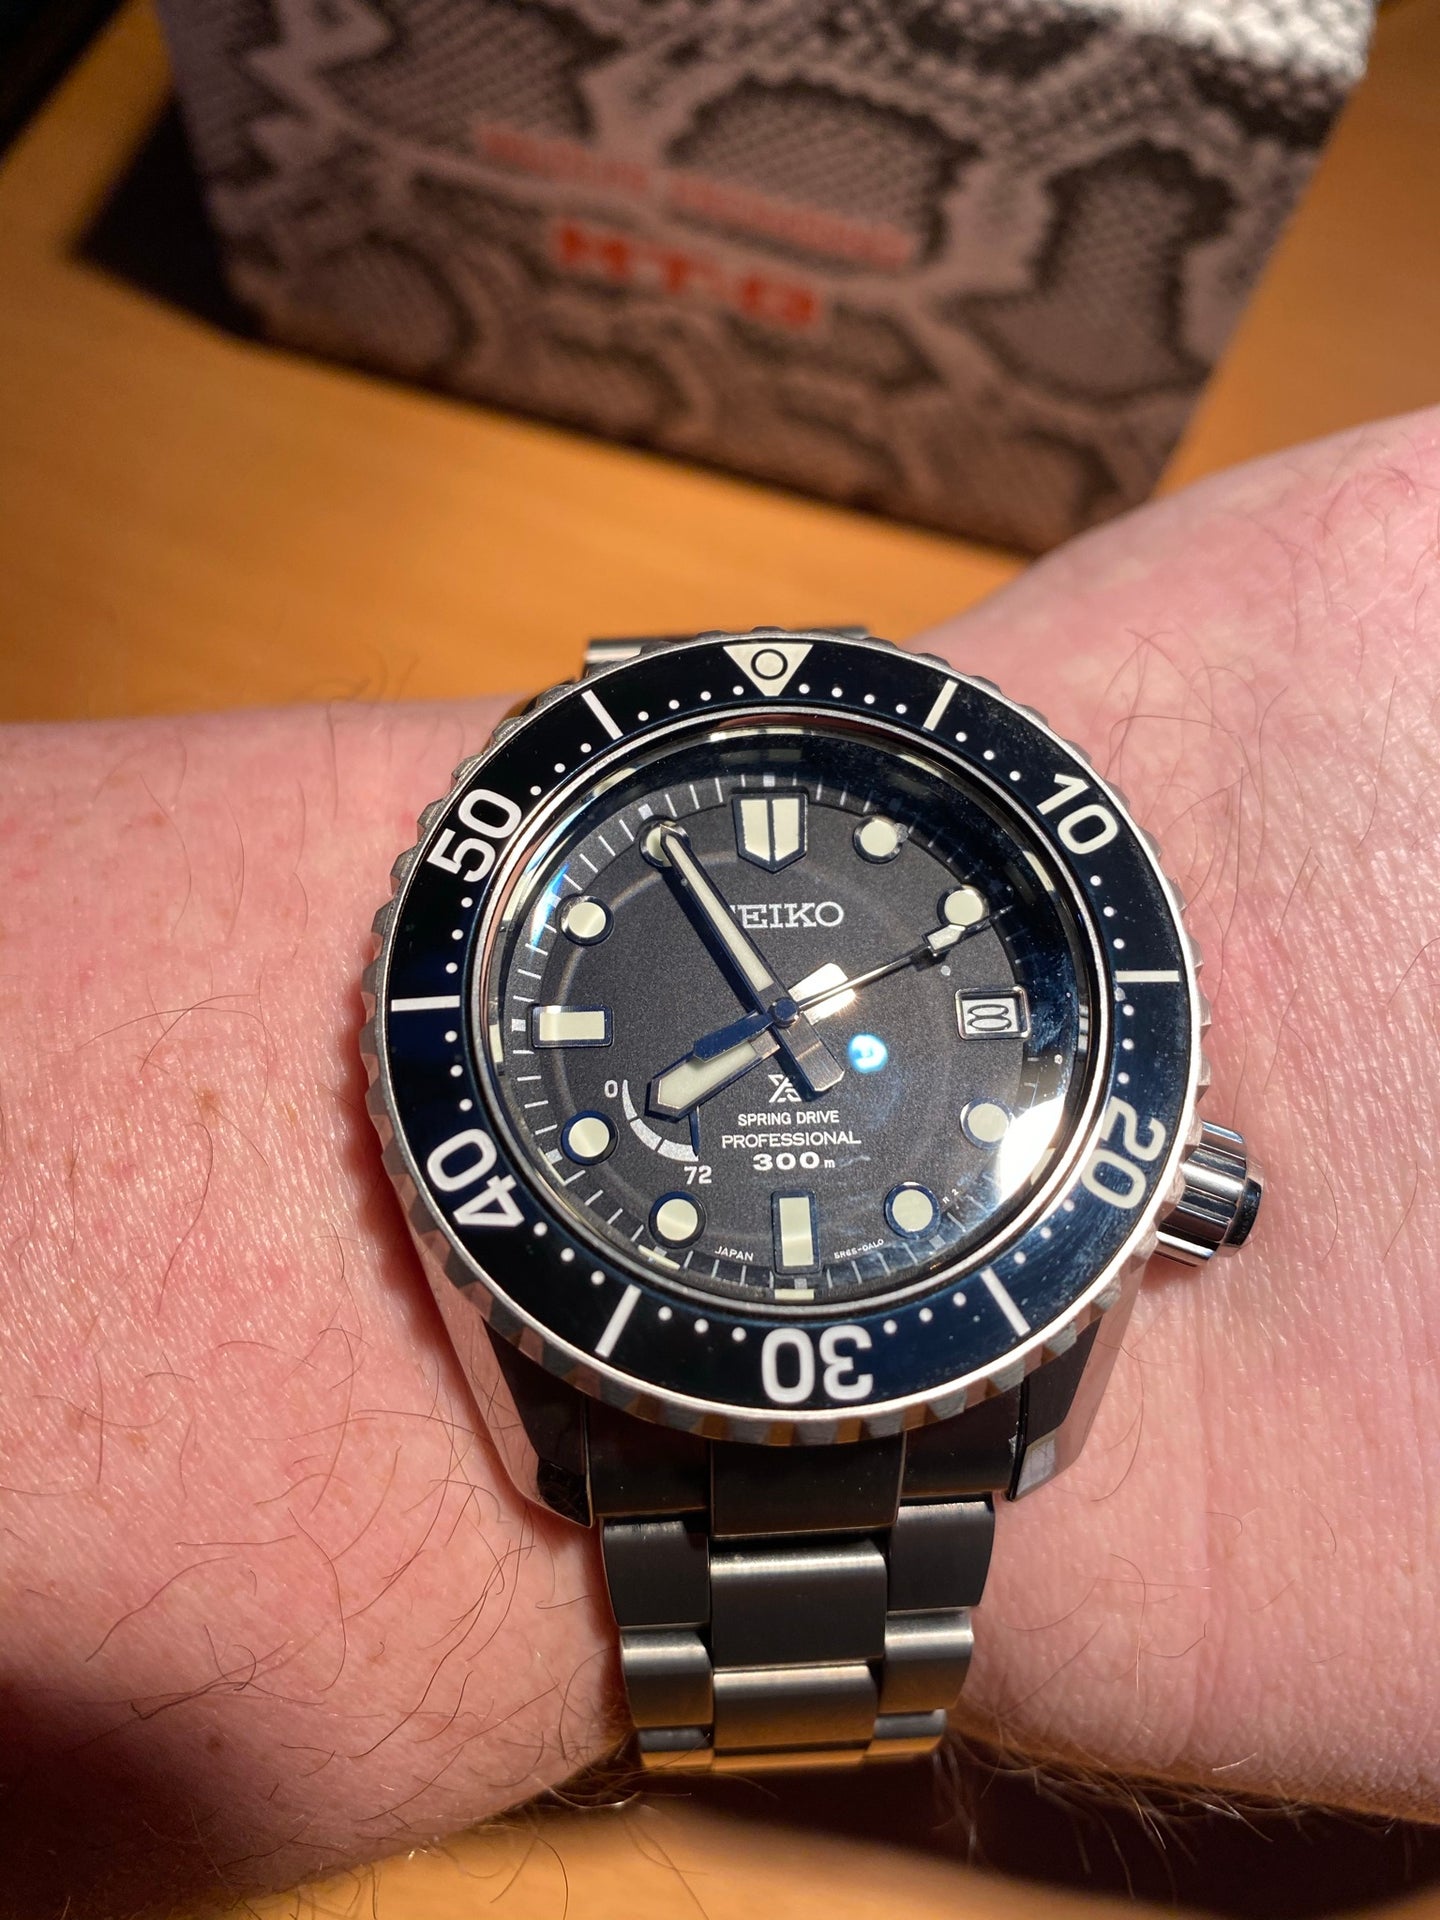 Seiko Prospex LX Watches - The Unofficial Thread! | Page 19 | WatchUSeek  Watch Forums